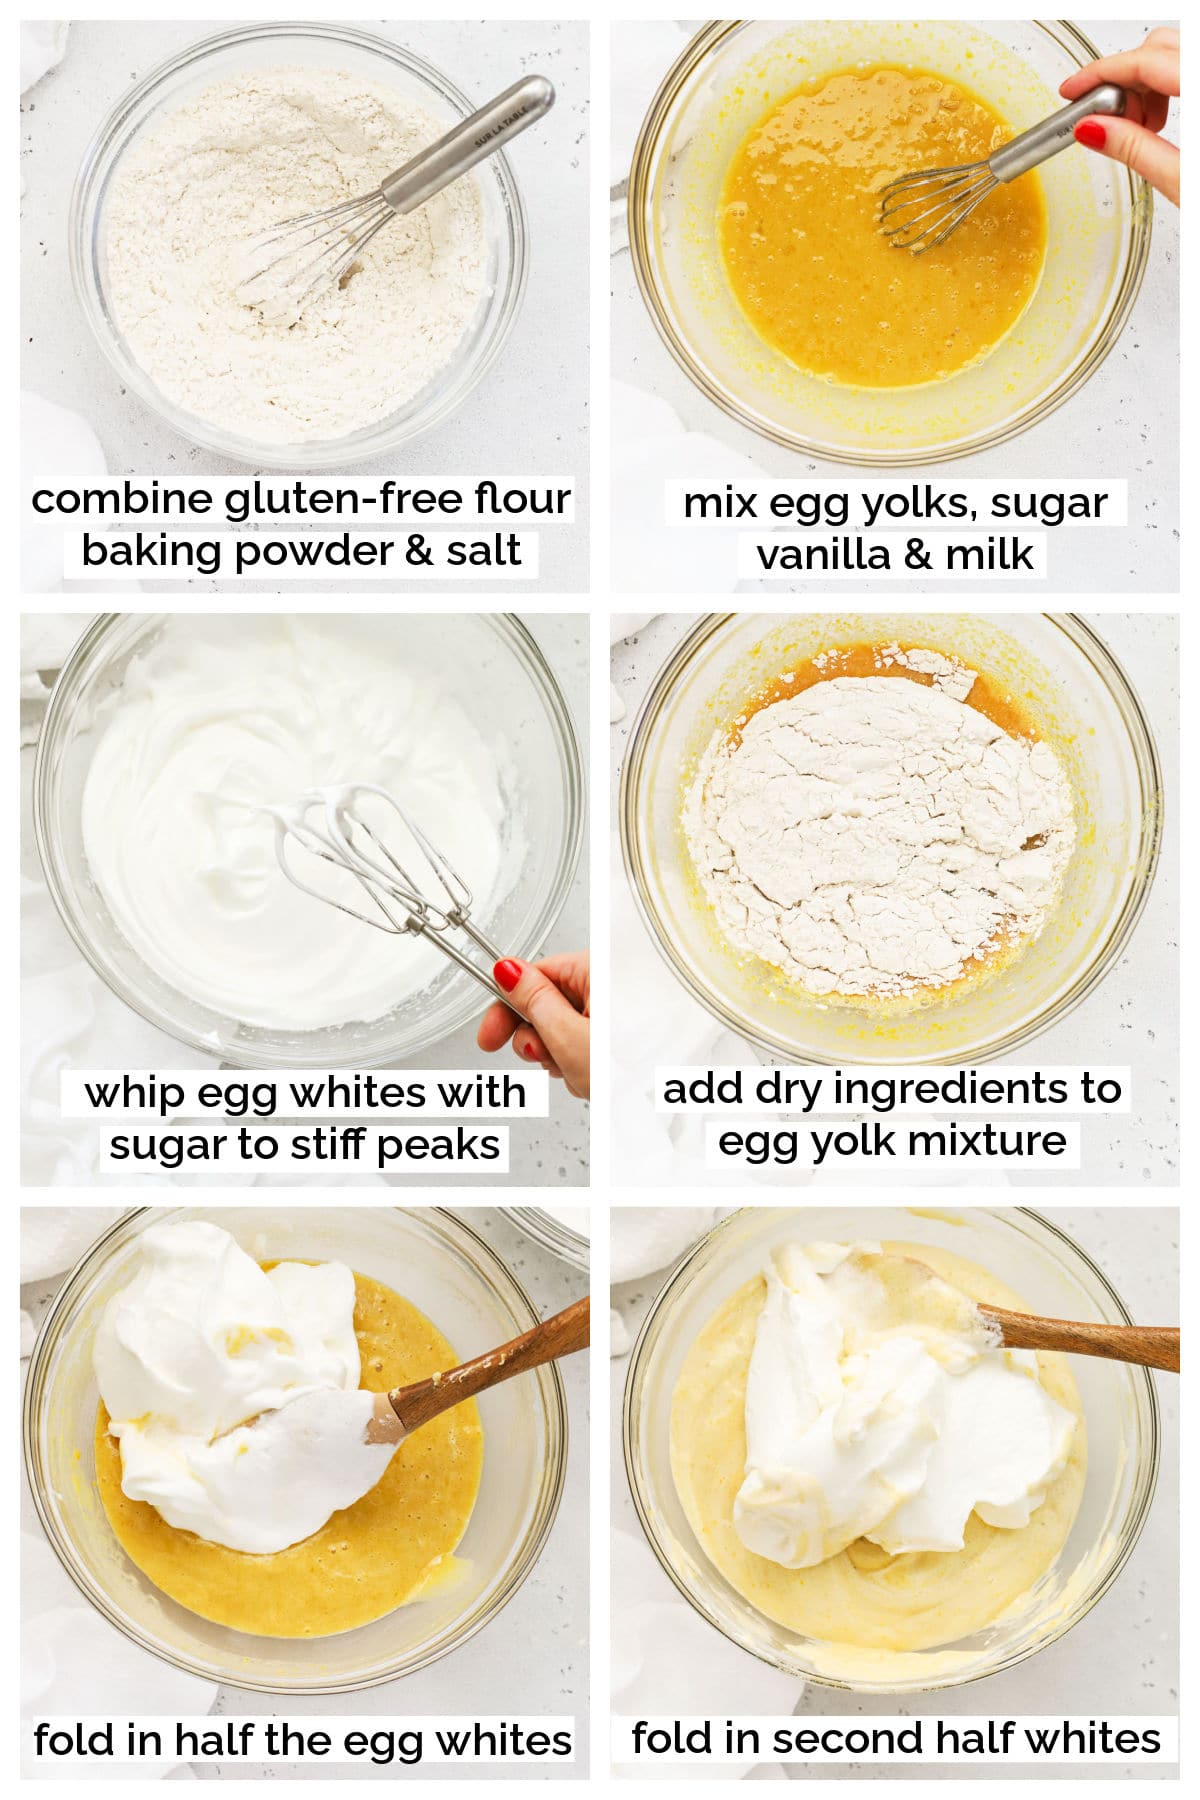 making gluten-free tres leches cake step by step